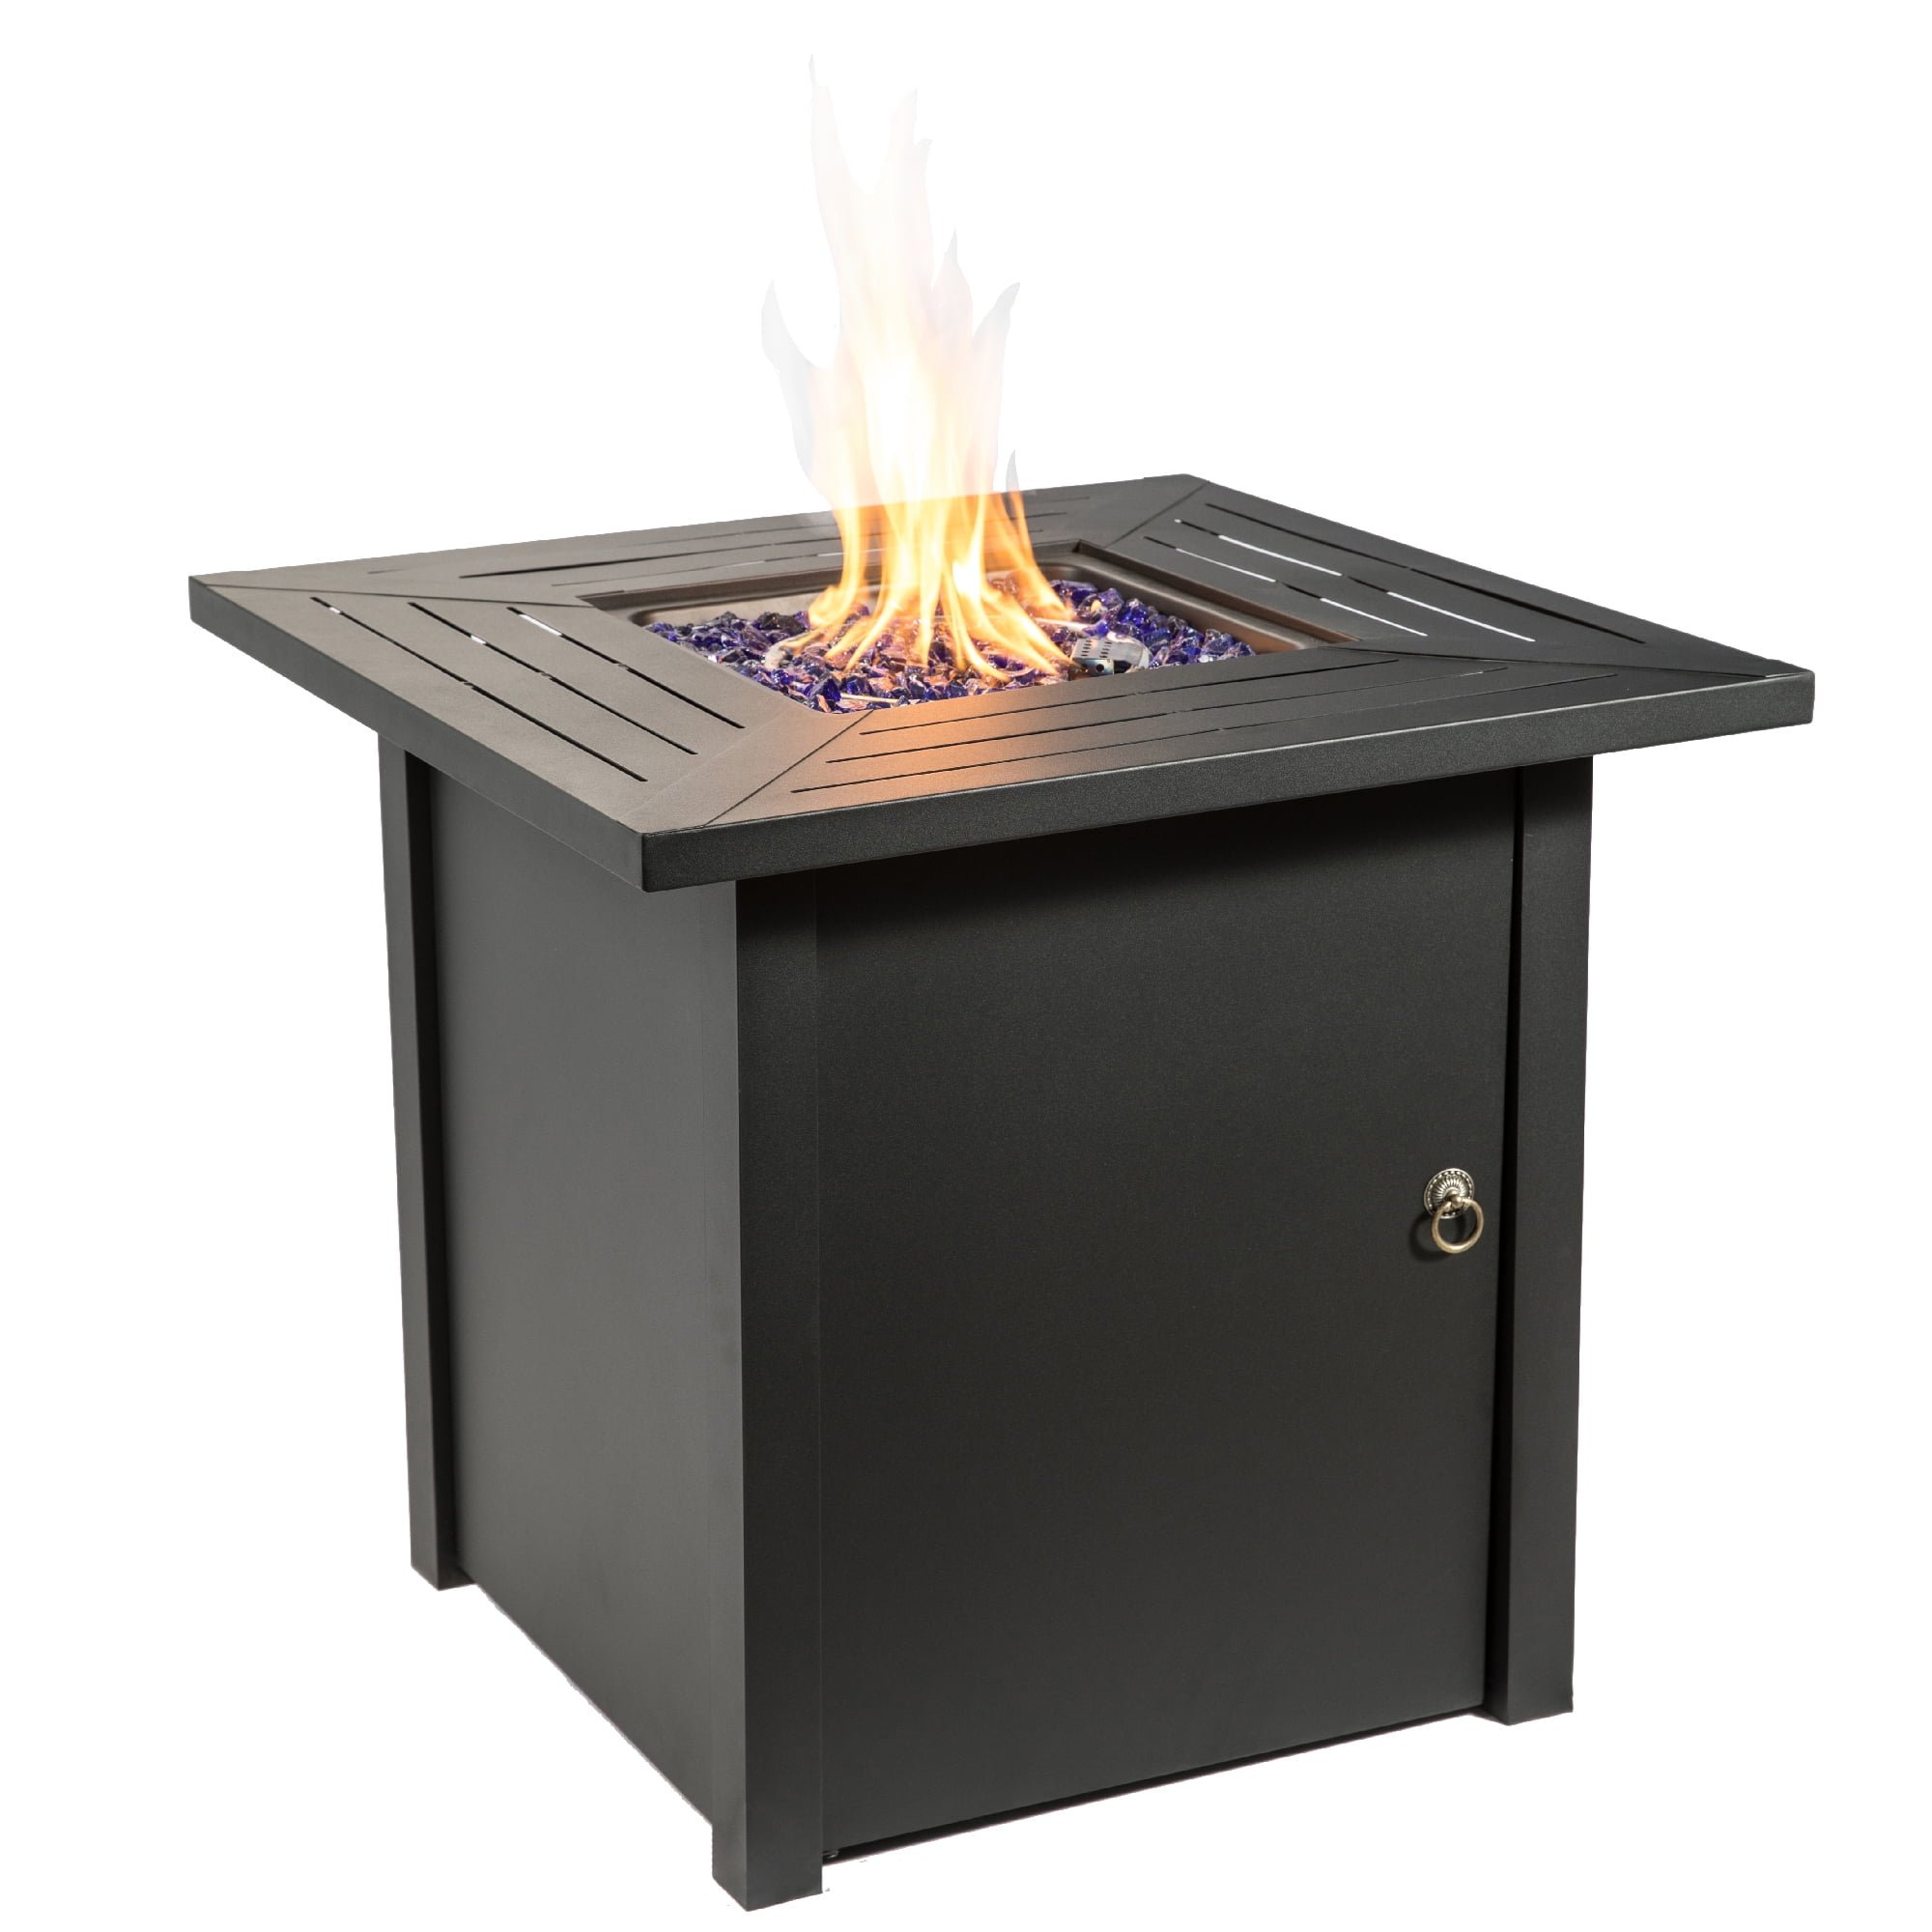 Peaktop Outdoor Square 30 Gas Fire Pit, Steel Gas Fire Pit